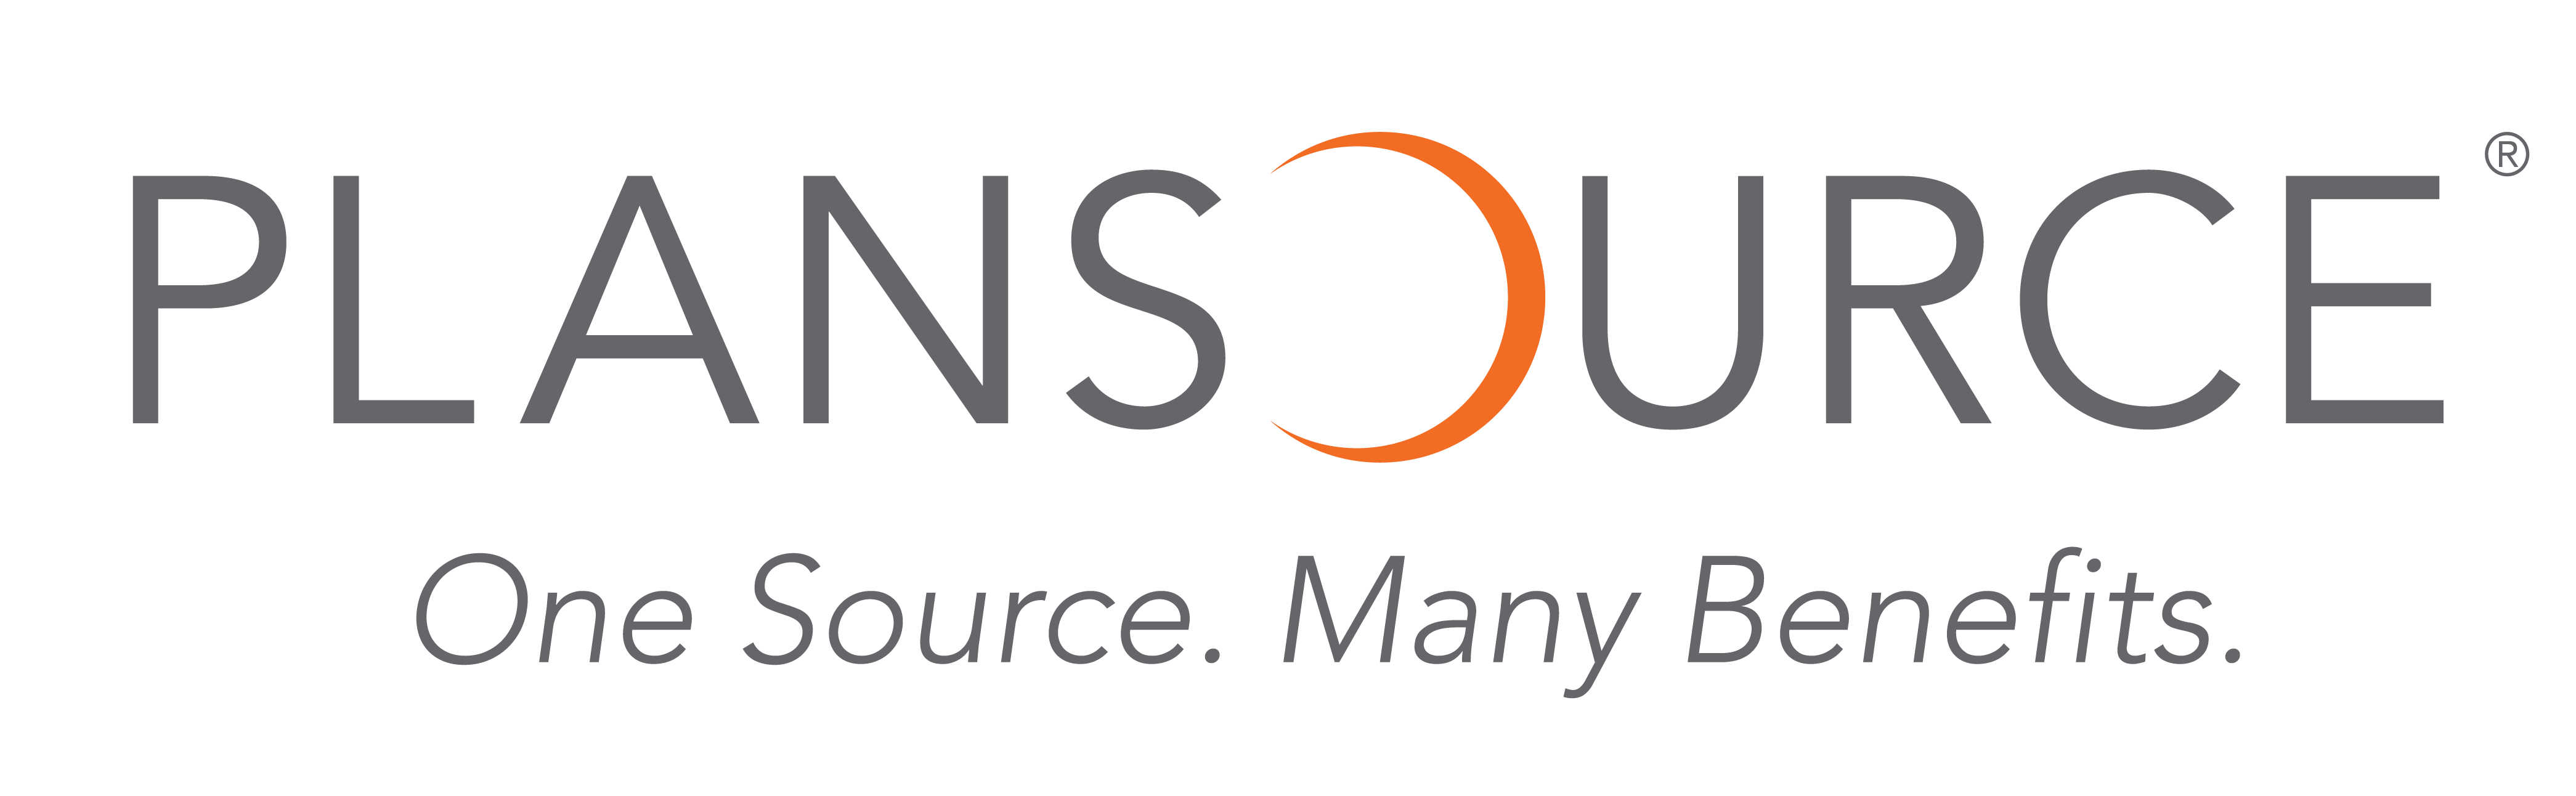 PlanSource Financial Services, Inc. Company Logo